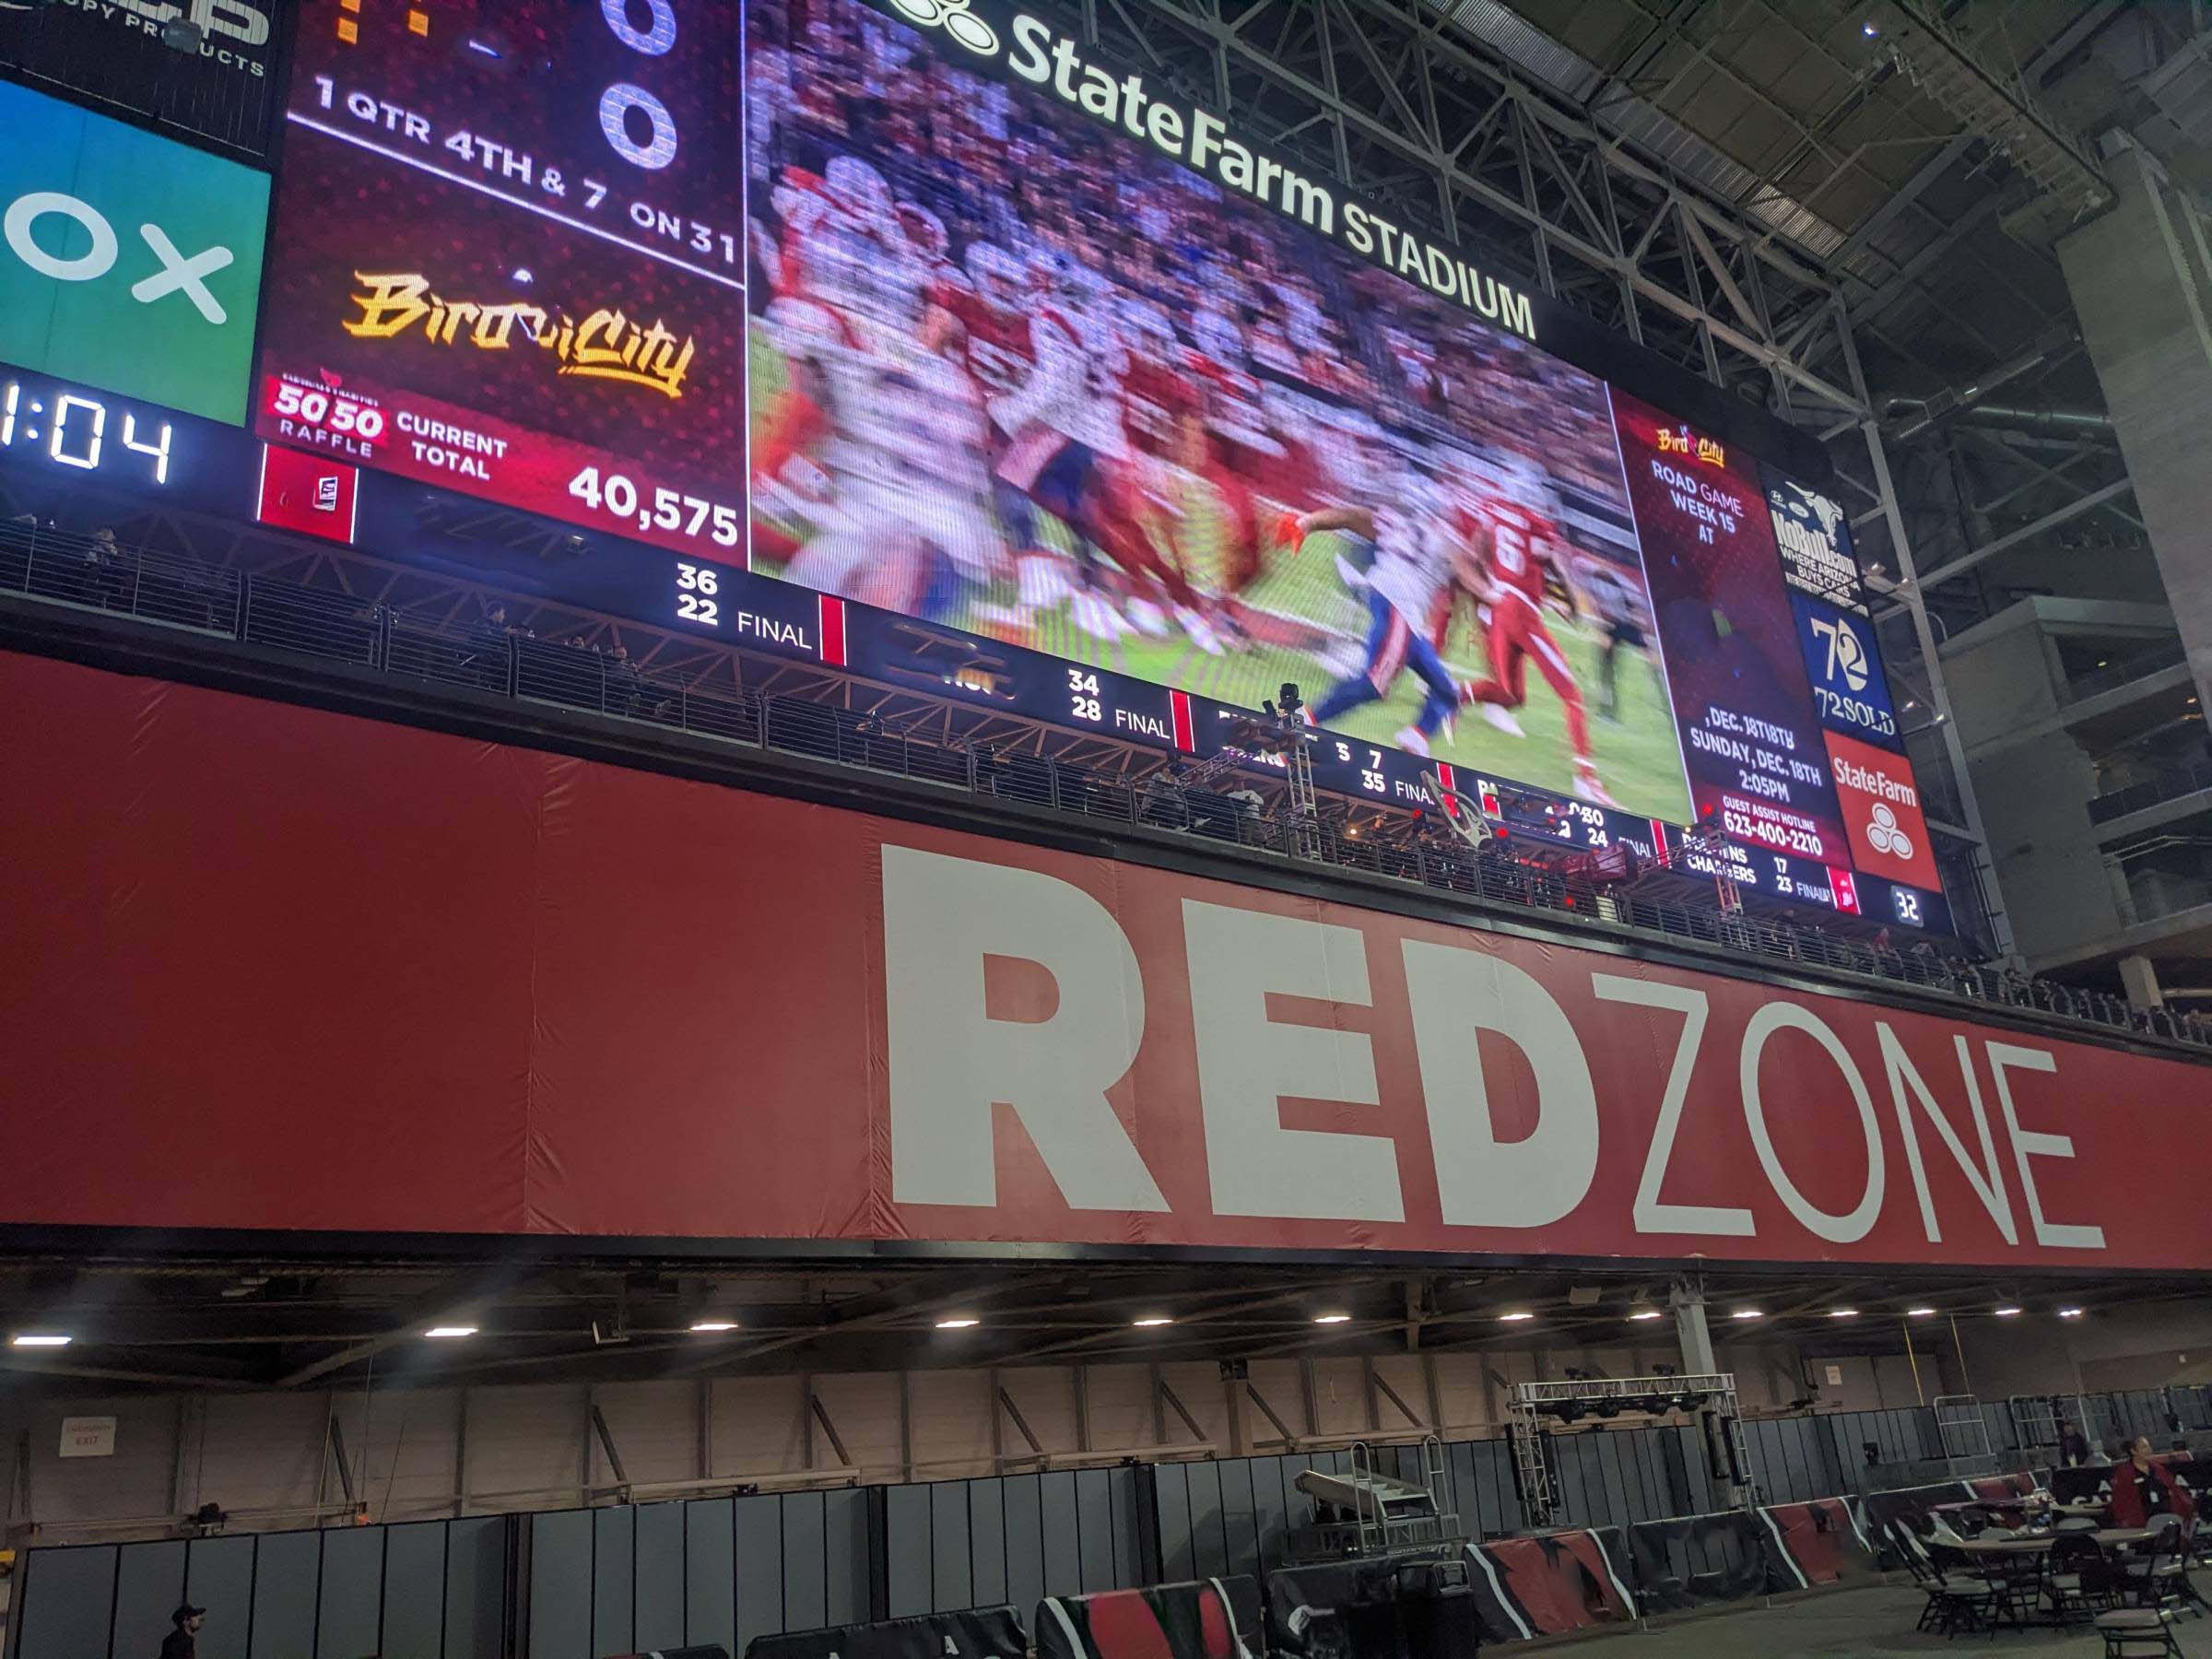 view of the scoreboard from red zone